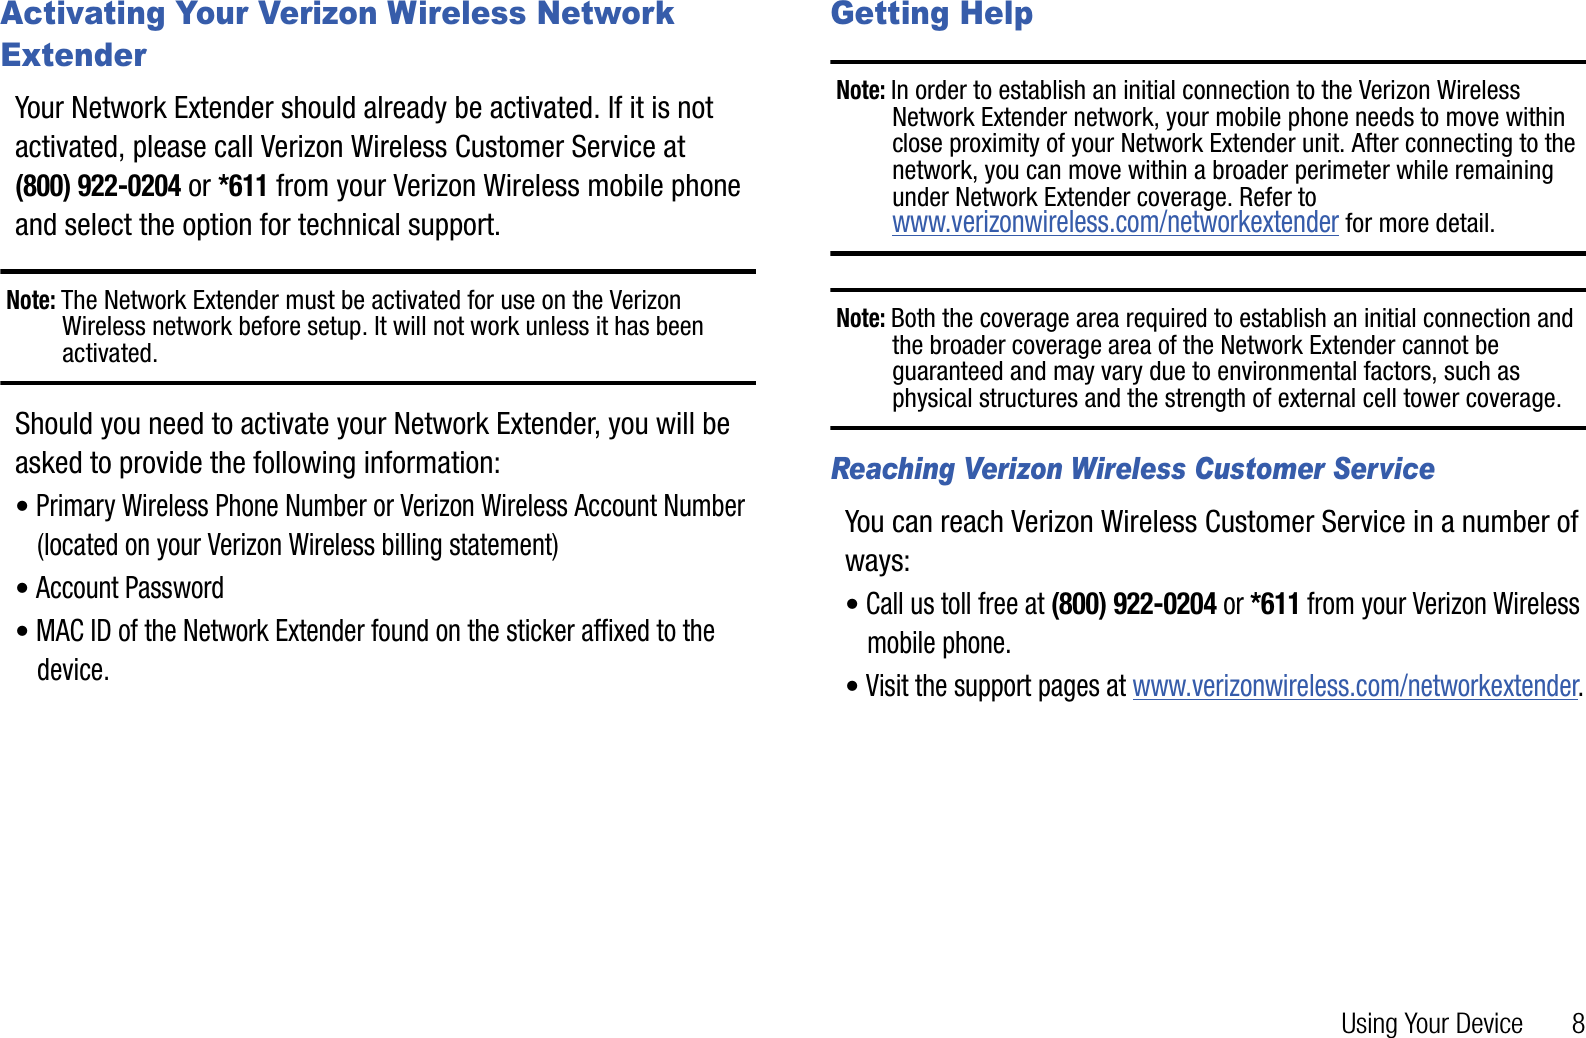 Using Your Device       8Activating Your Verizon Wireless Network ExtenderYour Network Extender should already be activated. If it is not activated, please call Verizon Wireless Customer Service at (800) 922-0204 or *611 from your Verizon Wireless mobile phone and select the option for technical support.Note: The Network Extender must be activated for use on the Verizon Wireless network before setup. It will not work unless it has been activated.Should you need to activate your Network Extender, you will be asked to provide the following information:•Primary Wireless Phone Number or Verizon Wireless Account Number (located on your Verizon Wireless billing statement)•Account Password•MAC ID of the Network Extender found on the sticker affixed to the device.Getting HelpNote: In order to establish an initial connection to the Verizon Wireless Network Extender network, your mobile phone needs to move within close proximity of your Network Extender unit. After connecting to the network, you can move within a broader perimeter while remaining under Network Extender coverage. Refer to www.verizonwireless.com/networkextender for more detail.Note: Both the coverage area required to establish an initial connection and the broader coverage area of the Network Extender cannot be guaranteed and may vary due to environmental factors, such as physical structures and the strength of external cell tower coverage.Reaching Verizon Wireless Customer ServiceYou can reach Verizon Wireless Customer Service in a number of ways:•Call us toll free at (800) 922-0204 or *611 from your Verizon Wireless mobile phone.•Visit the support pages at www.verizonwireless.com/networkextender.